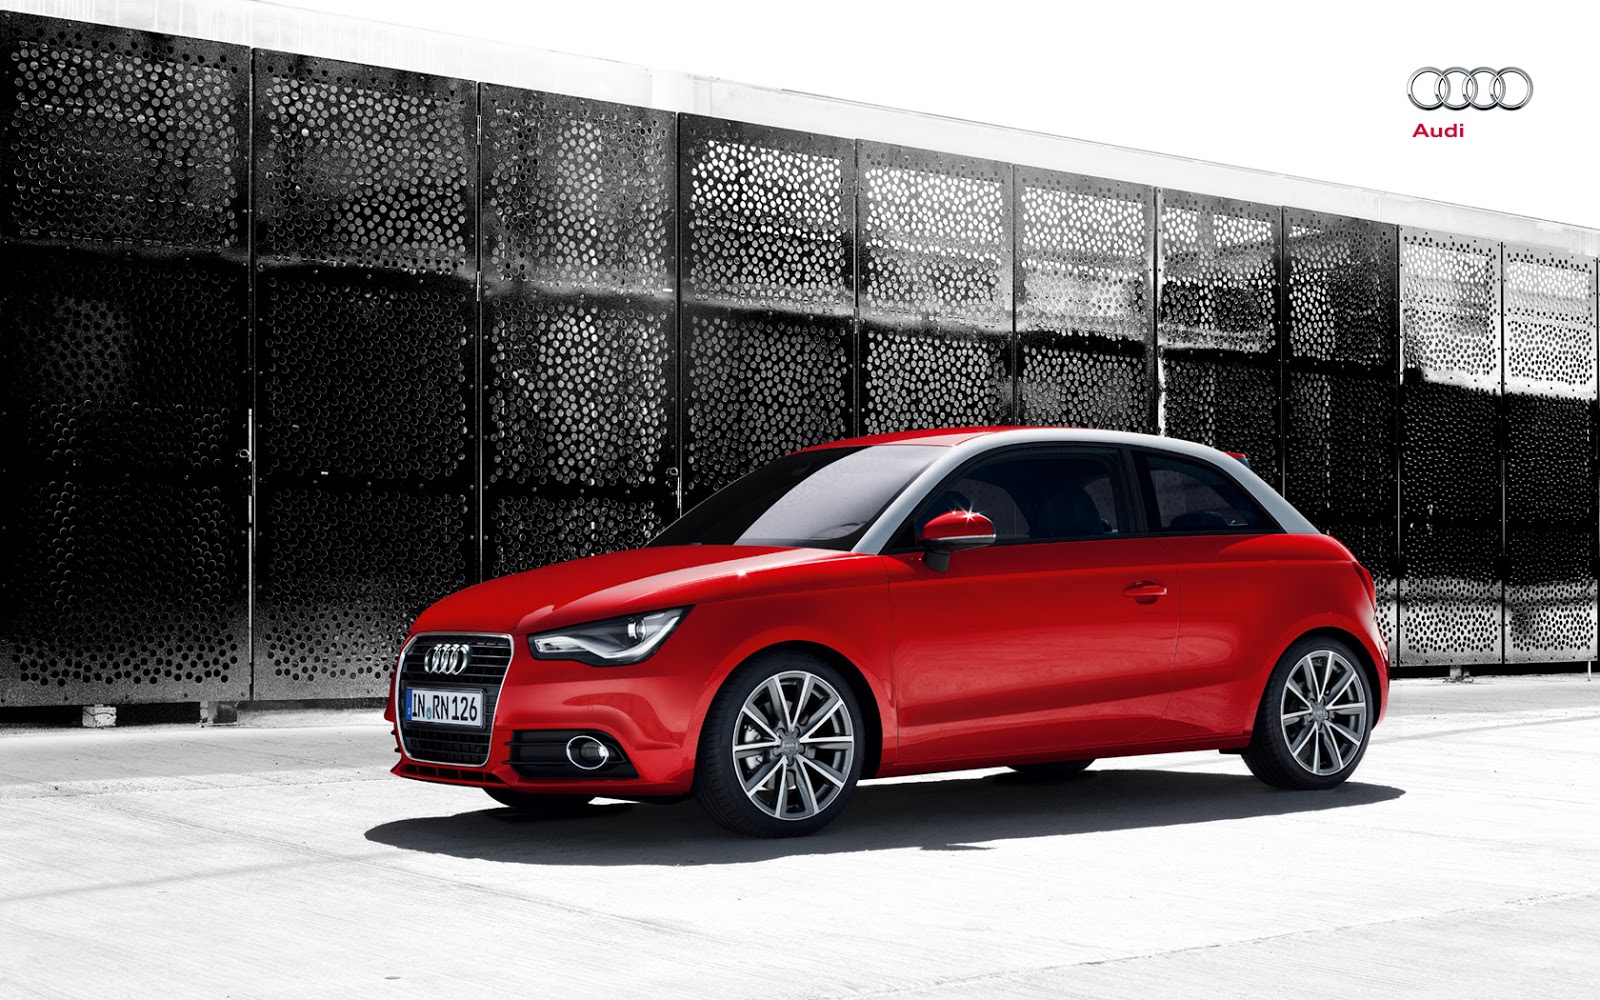 World's Beautiful Cars: Audi A1 Luxury small Car Photos and Wallpapers